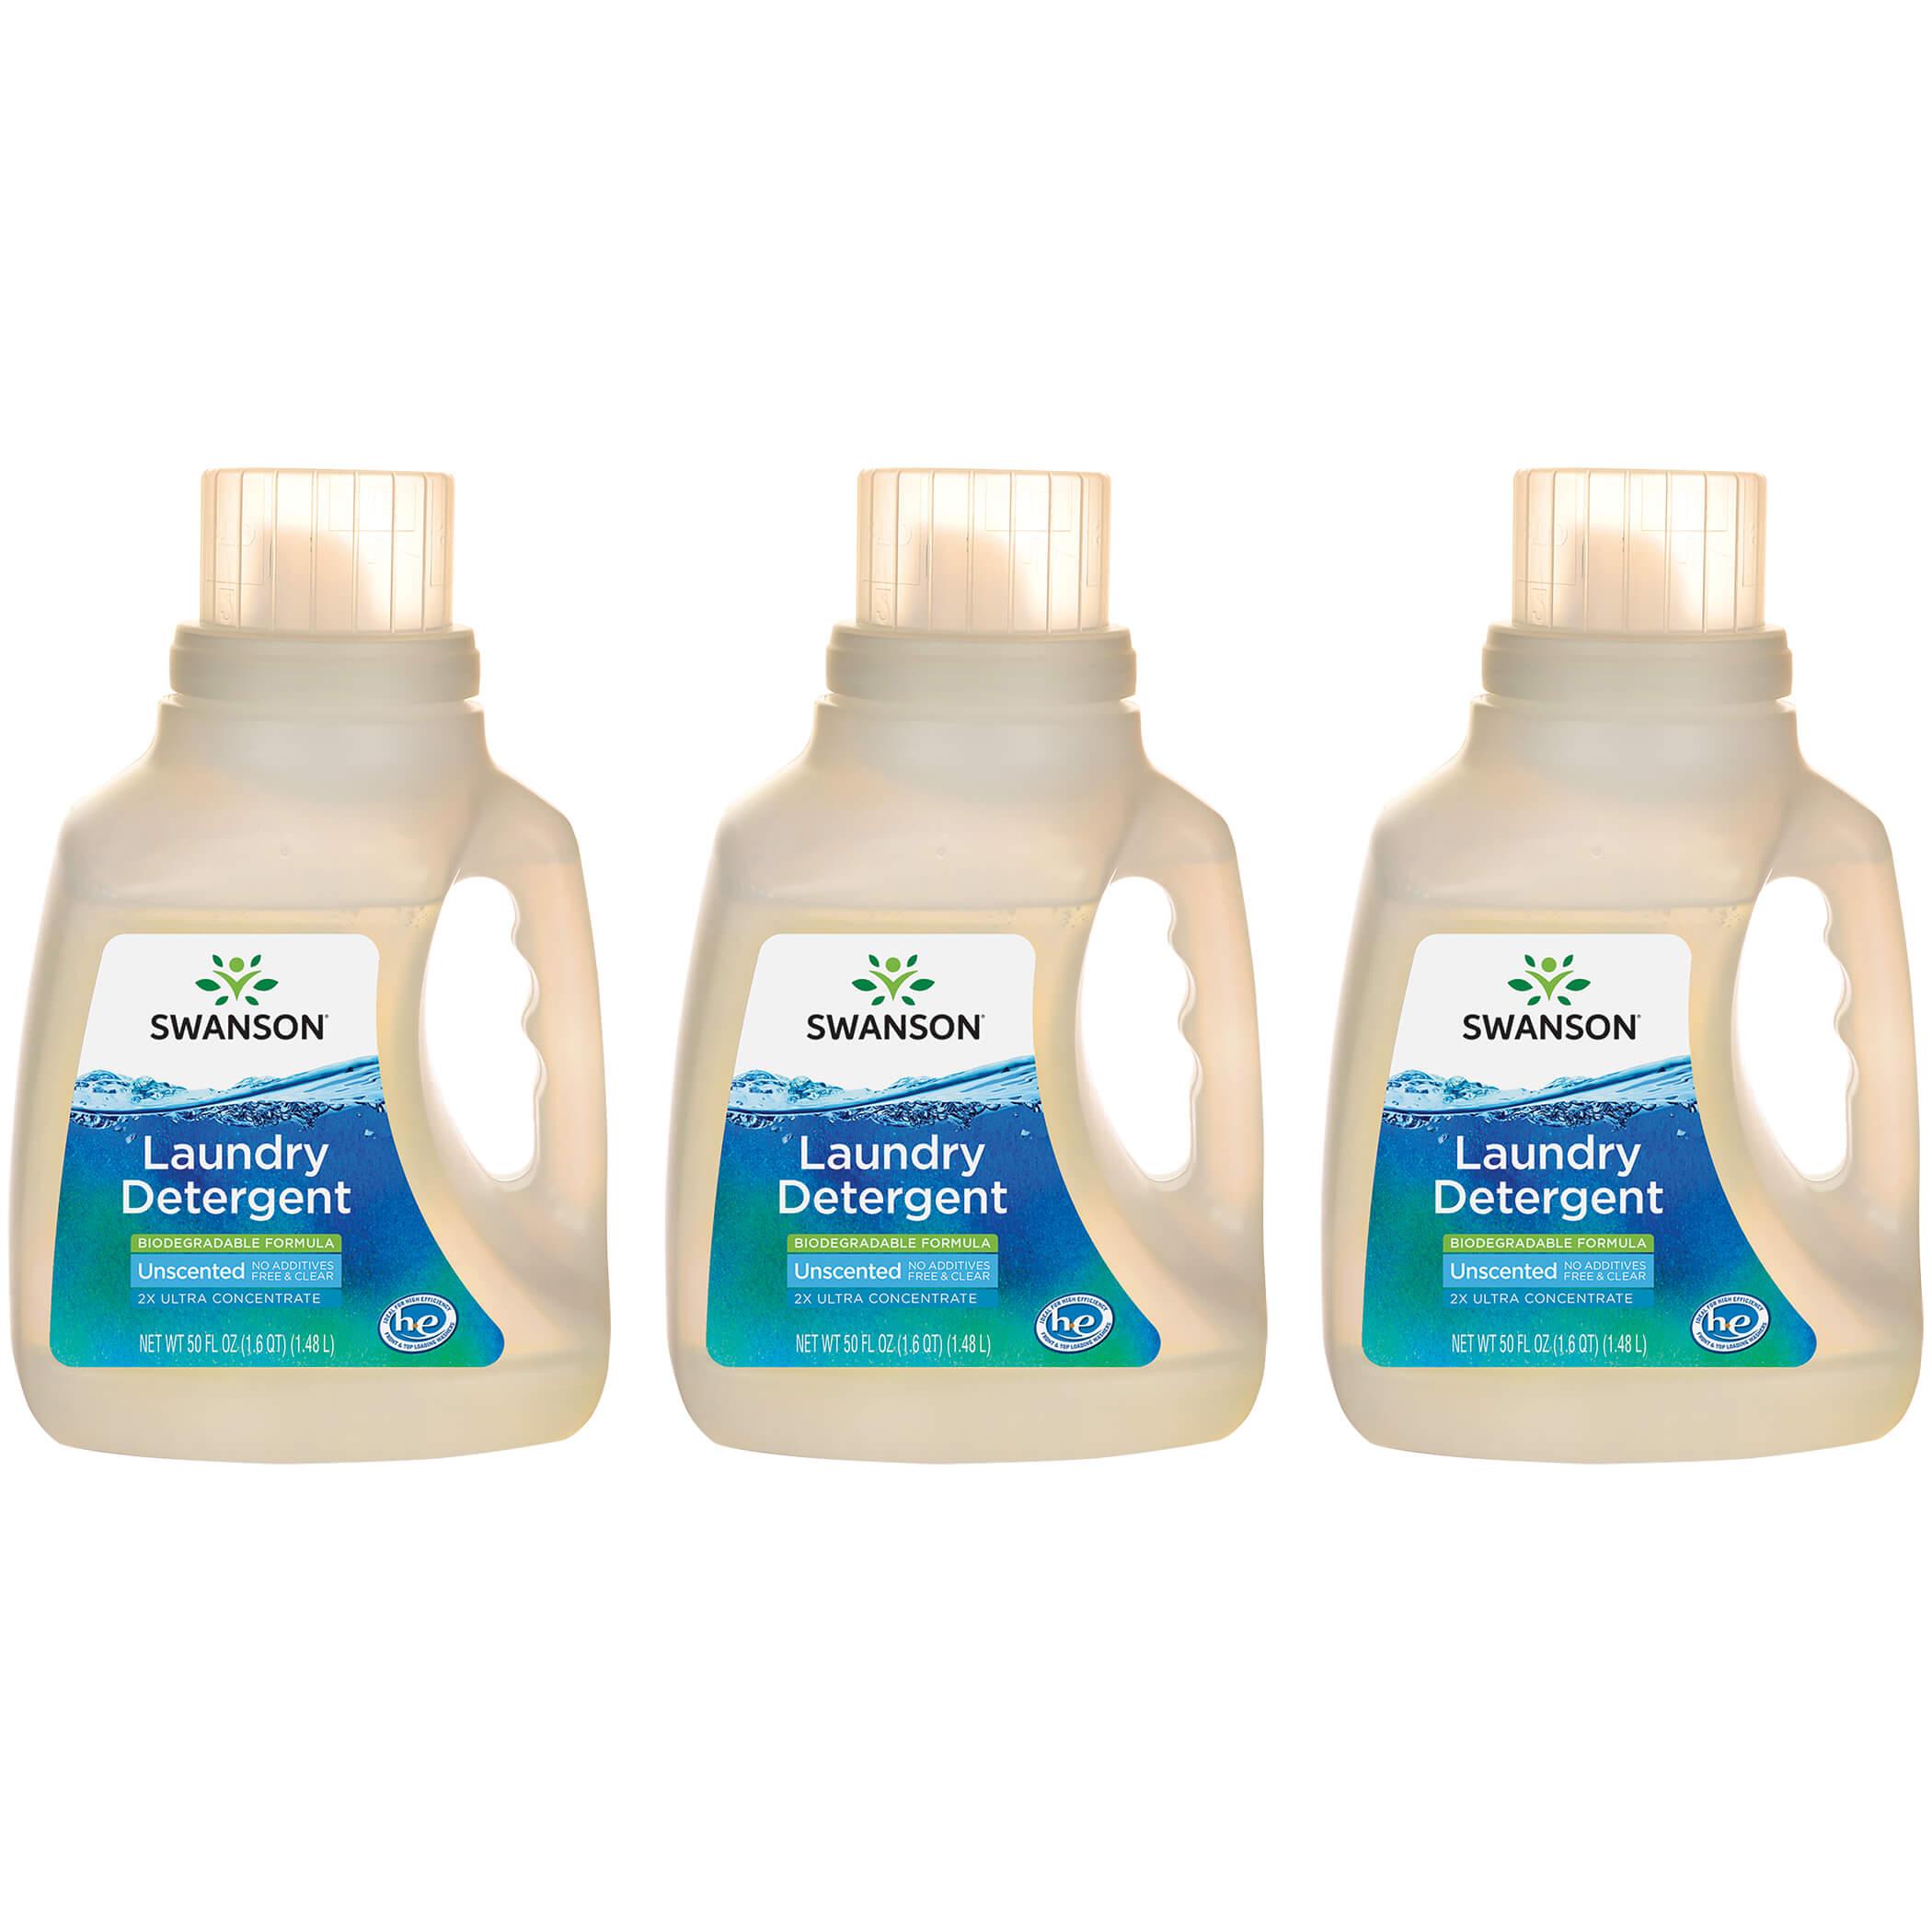 Swanson Healthy Home Laundry Detergent - Eco-Friendly Unscented 3 Pack 50 fl oz Liquid